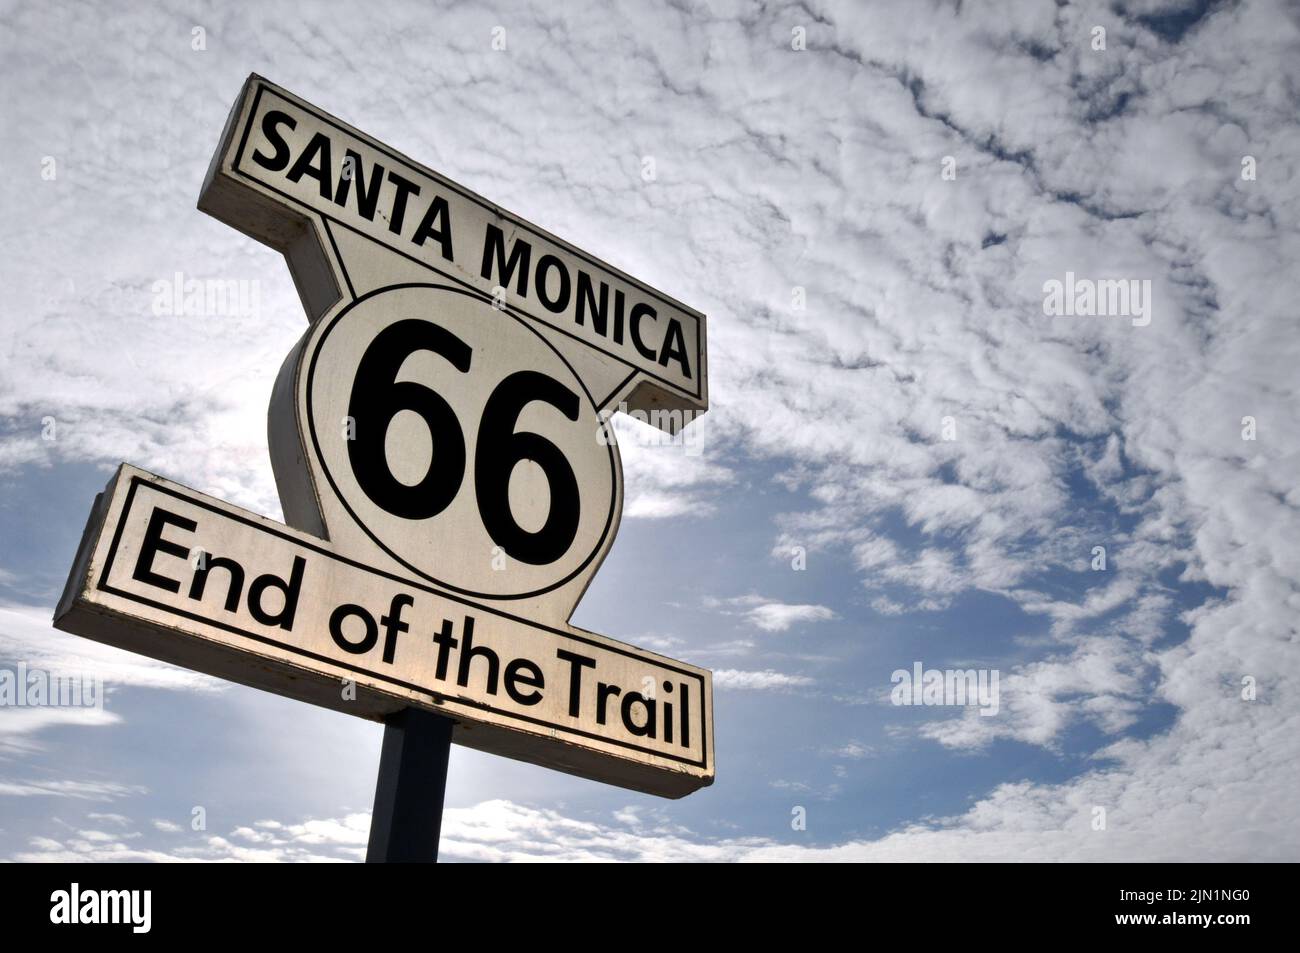 The 'End of the Trail' sign on the Santa Monica Pier in California marks the symbolic western end of historic Route 66. Stock Photo